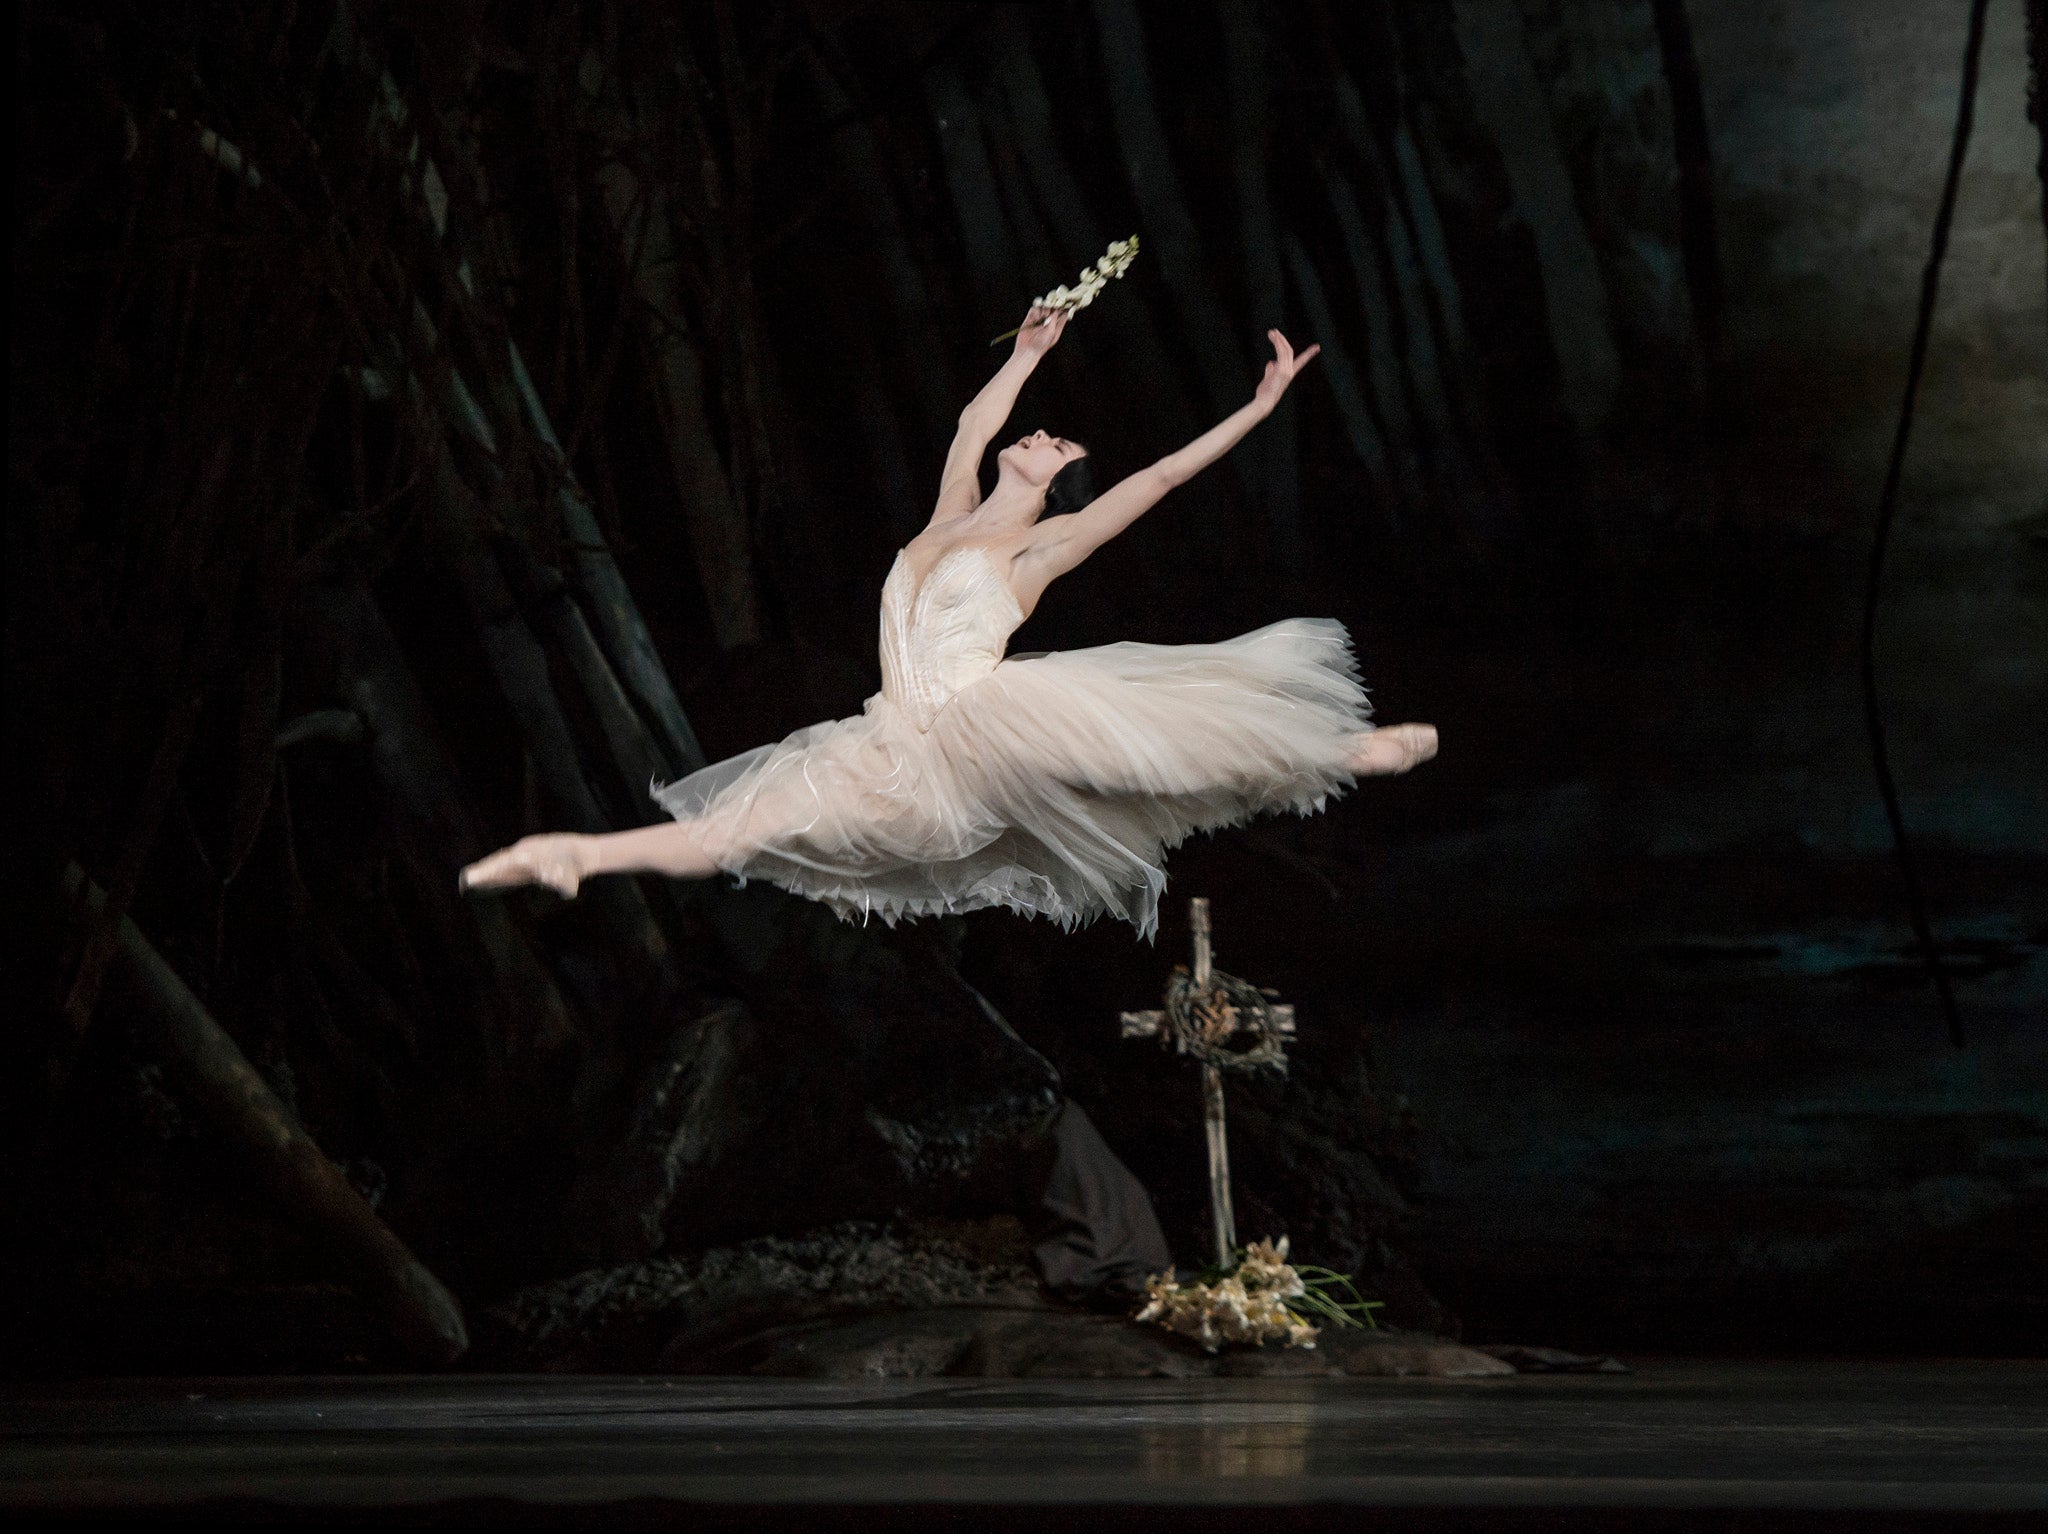 Natalia Osipova plays Giselle in the Royal Opera House's production with Carlos Acosta